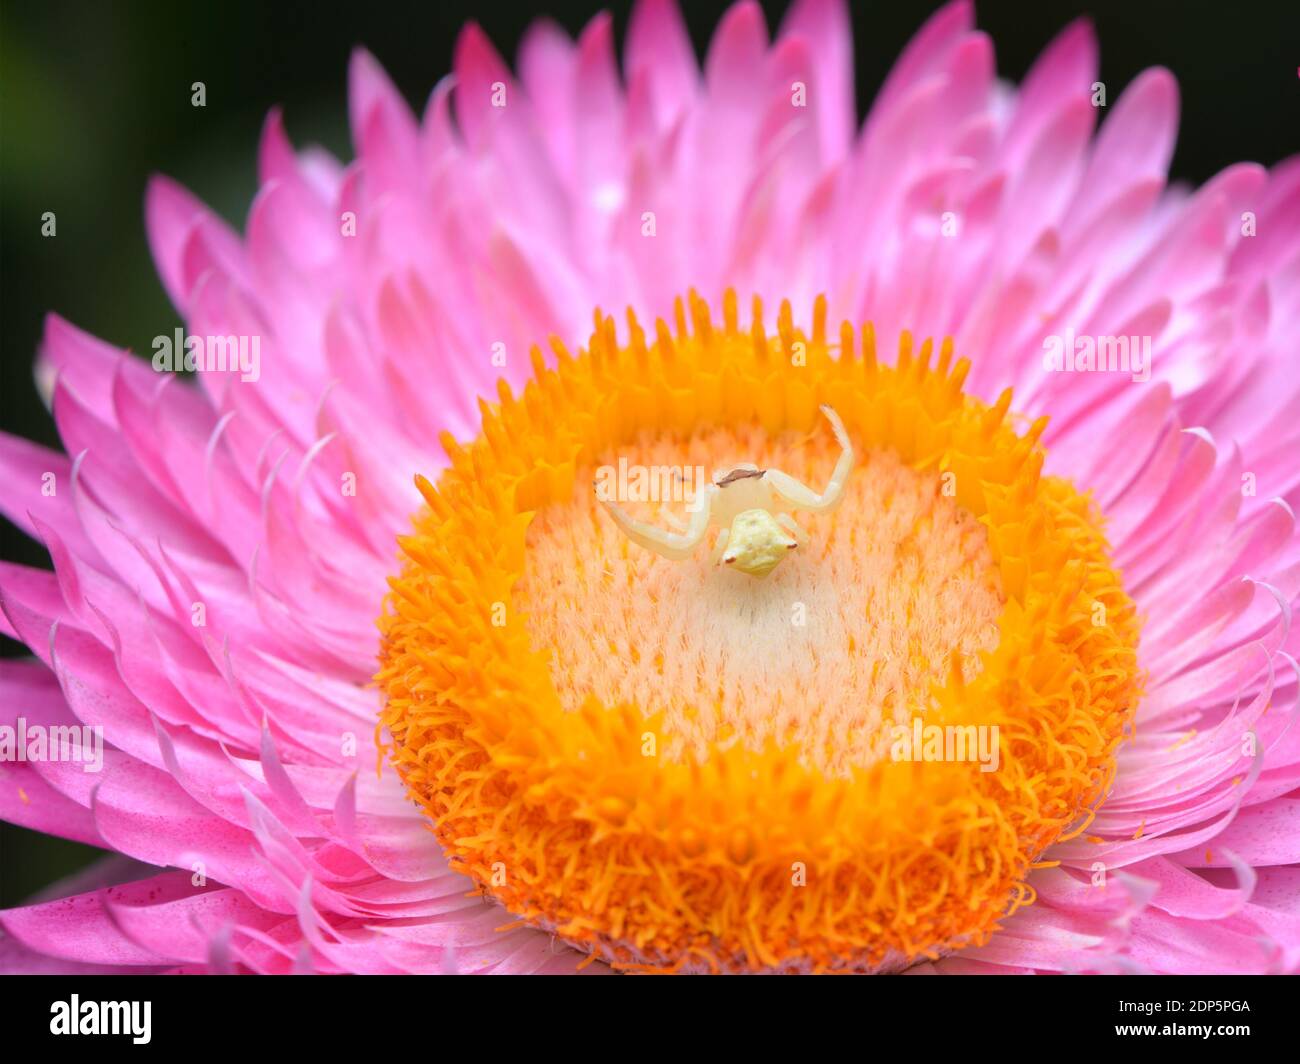 Crab spider on top of a flower. Stock Photo